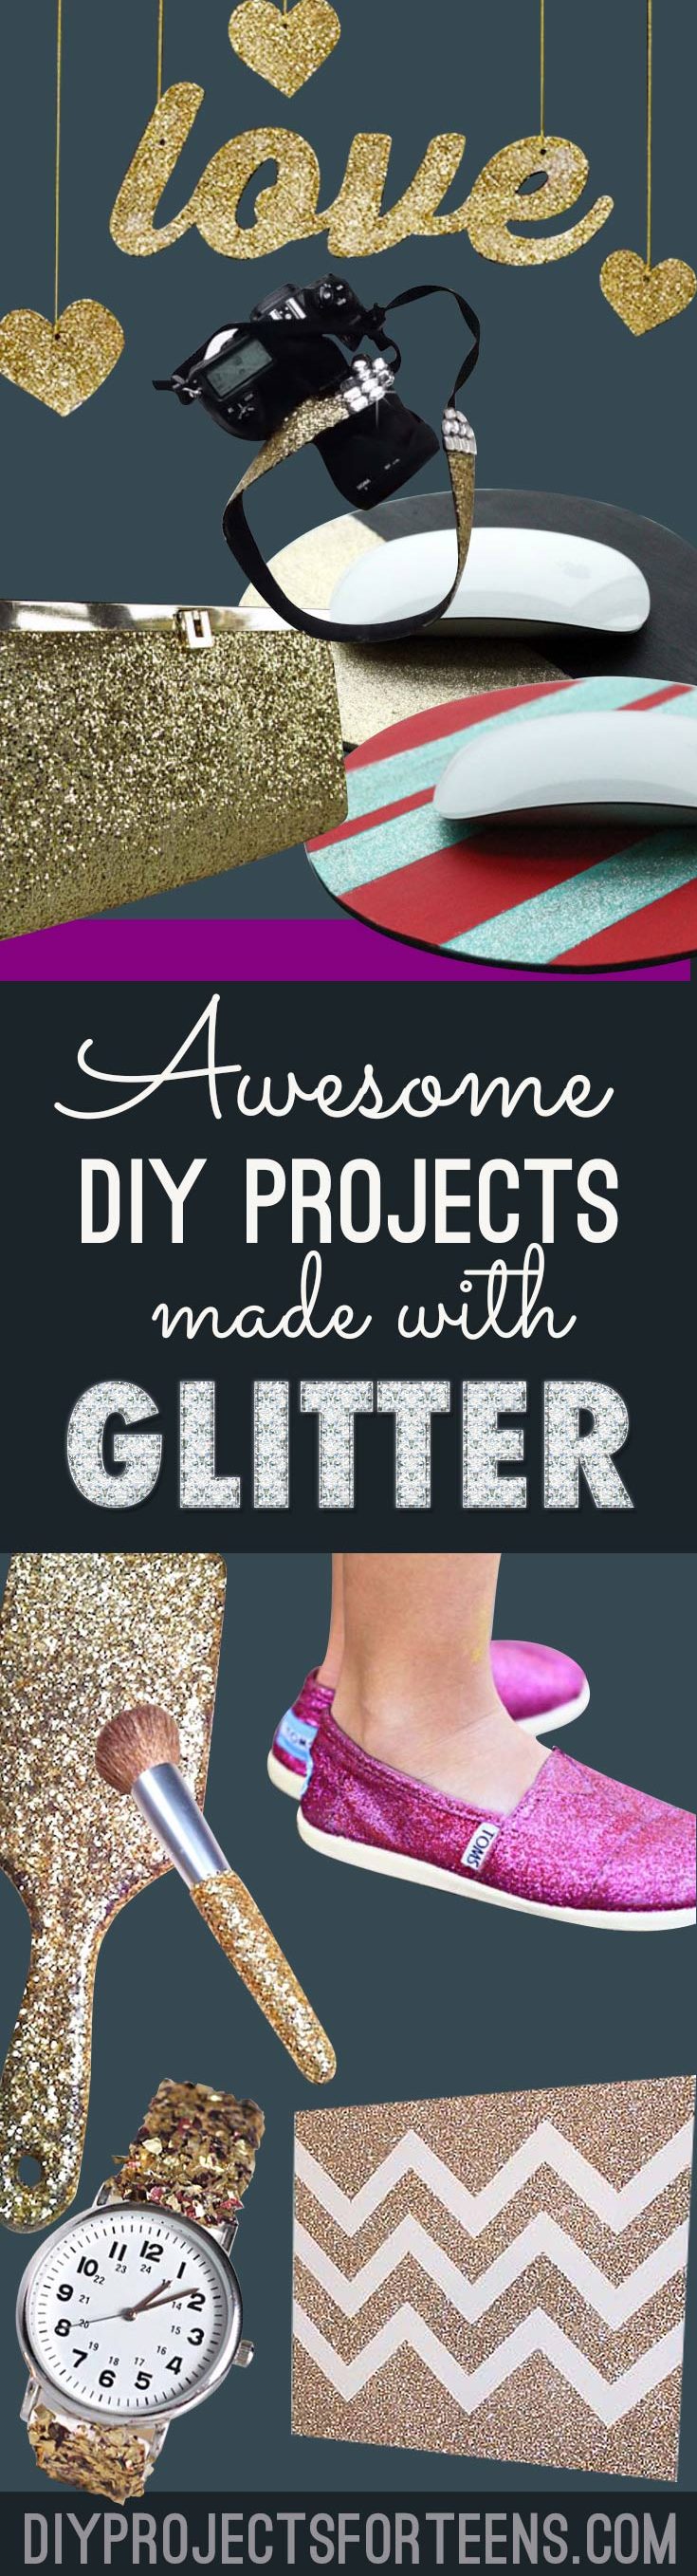 Cool DIY Crafts Made With Glitter - Sparkly, Creative Projects and Ideas for the Bedroom, Clothes, Shoes, Gifts, Wedding and Home Decor | Easy Teen Crafts, Gifts and Room Decor Ideas